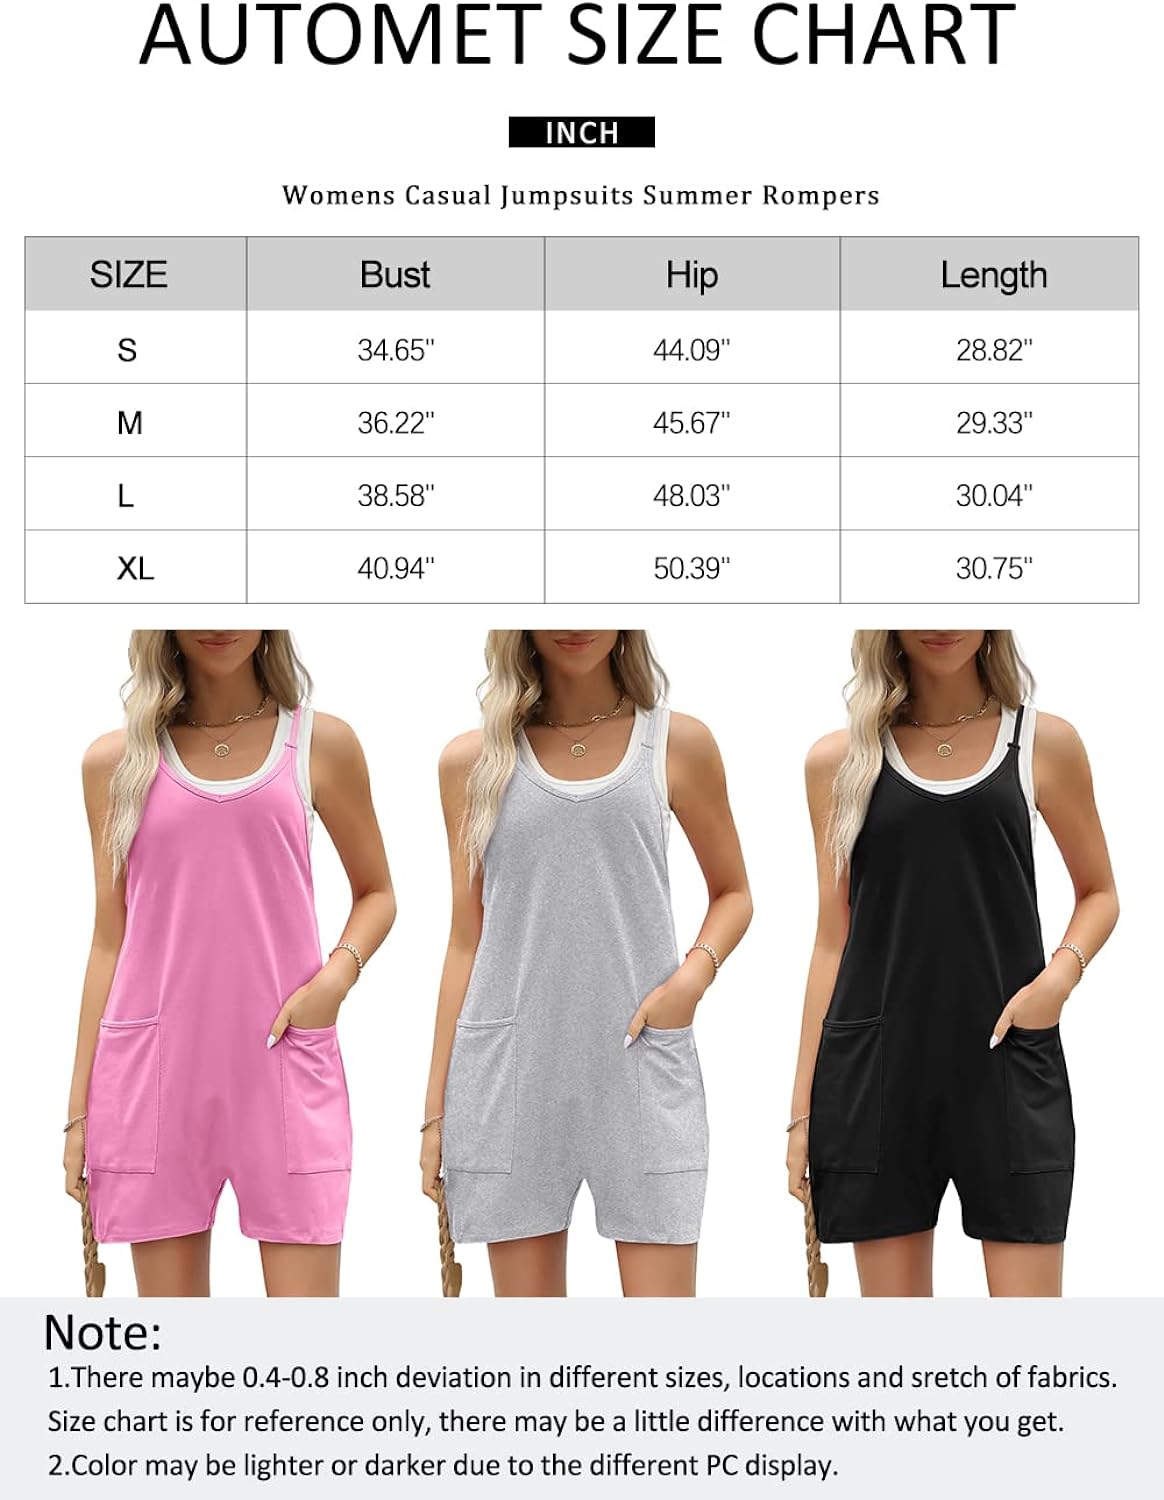 AUTOMET Womens Casual Sleeveless Shorts Jumpsuits with Pockets